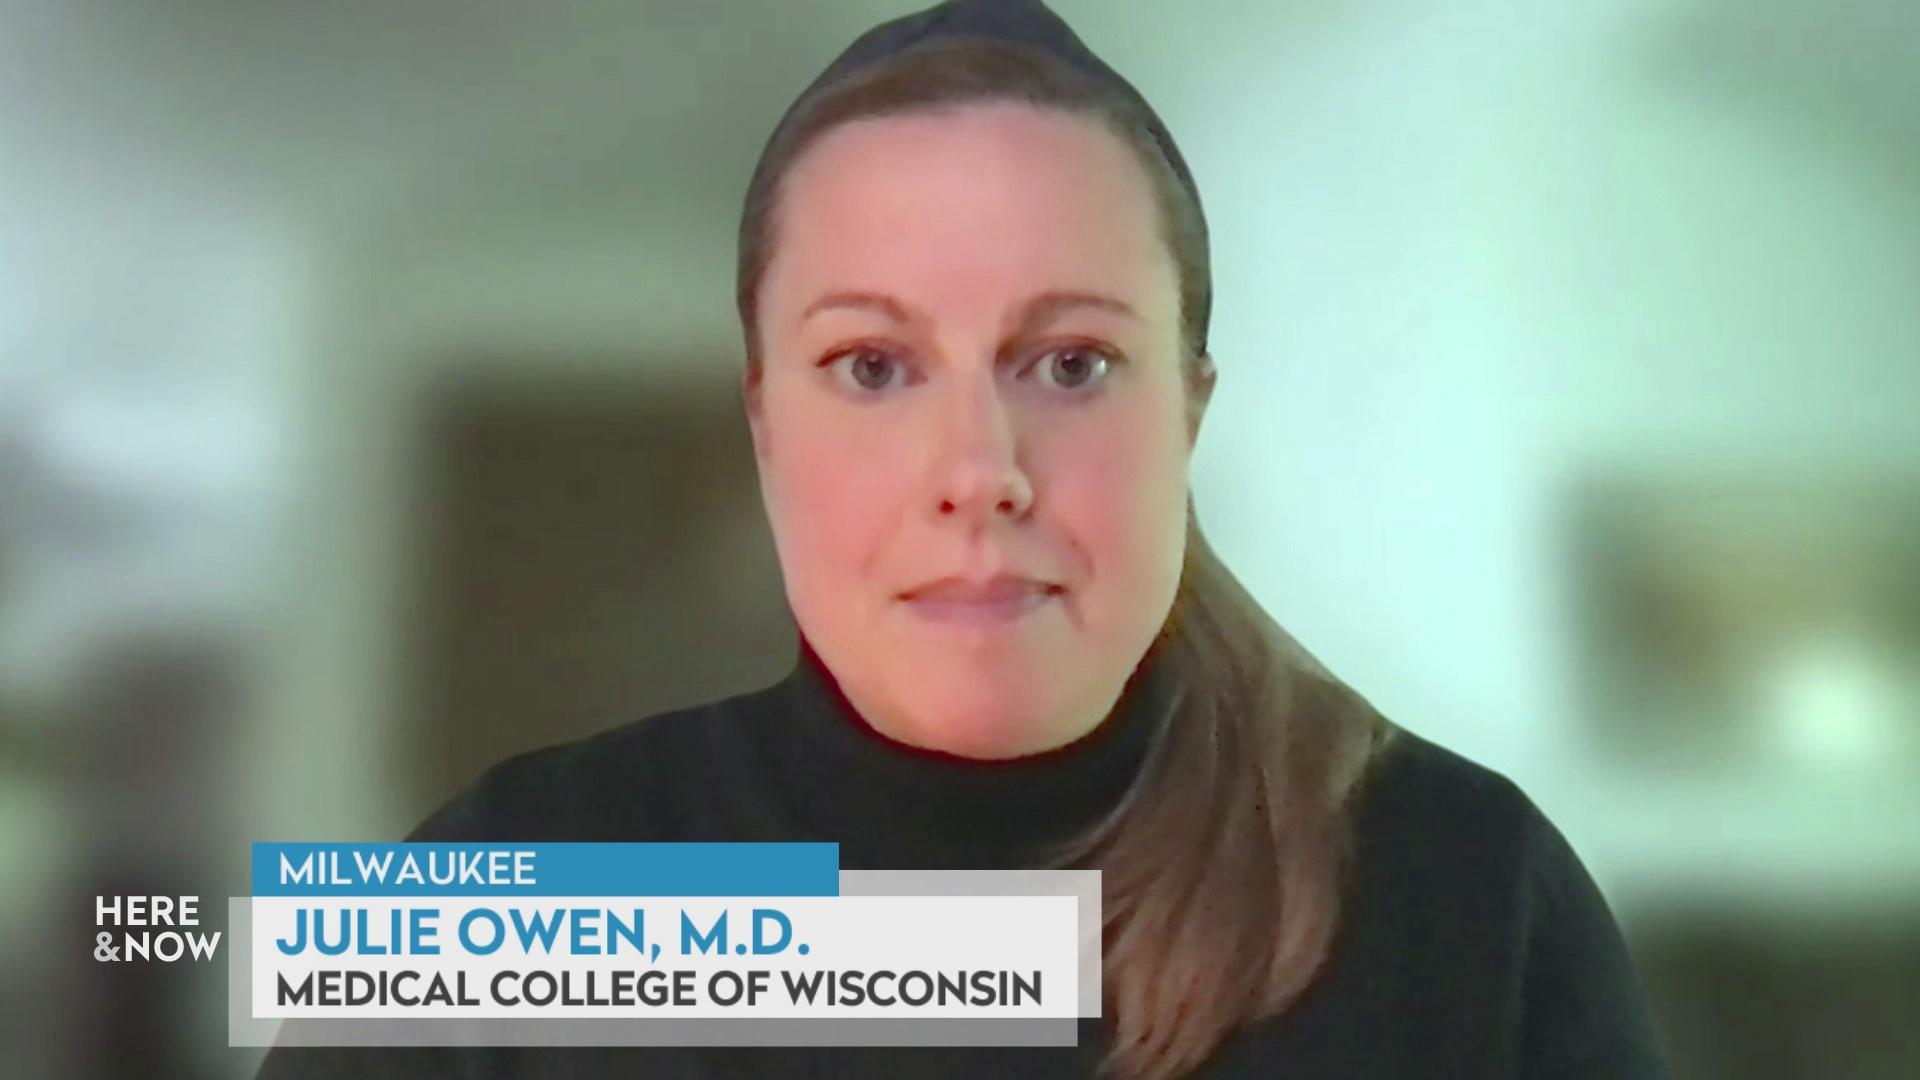 A still image from a video shows Julie Owen seated in front of a blurred background with a graphic at bottom reading 'Milwaukee,' 'Julie Owen, M.D.' and 'Medical College of Wisconsin.'